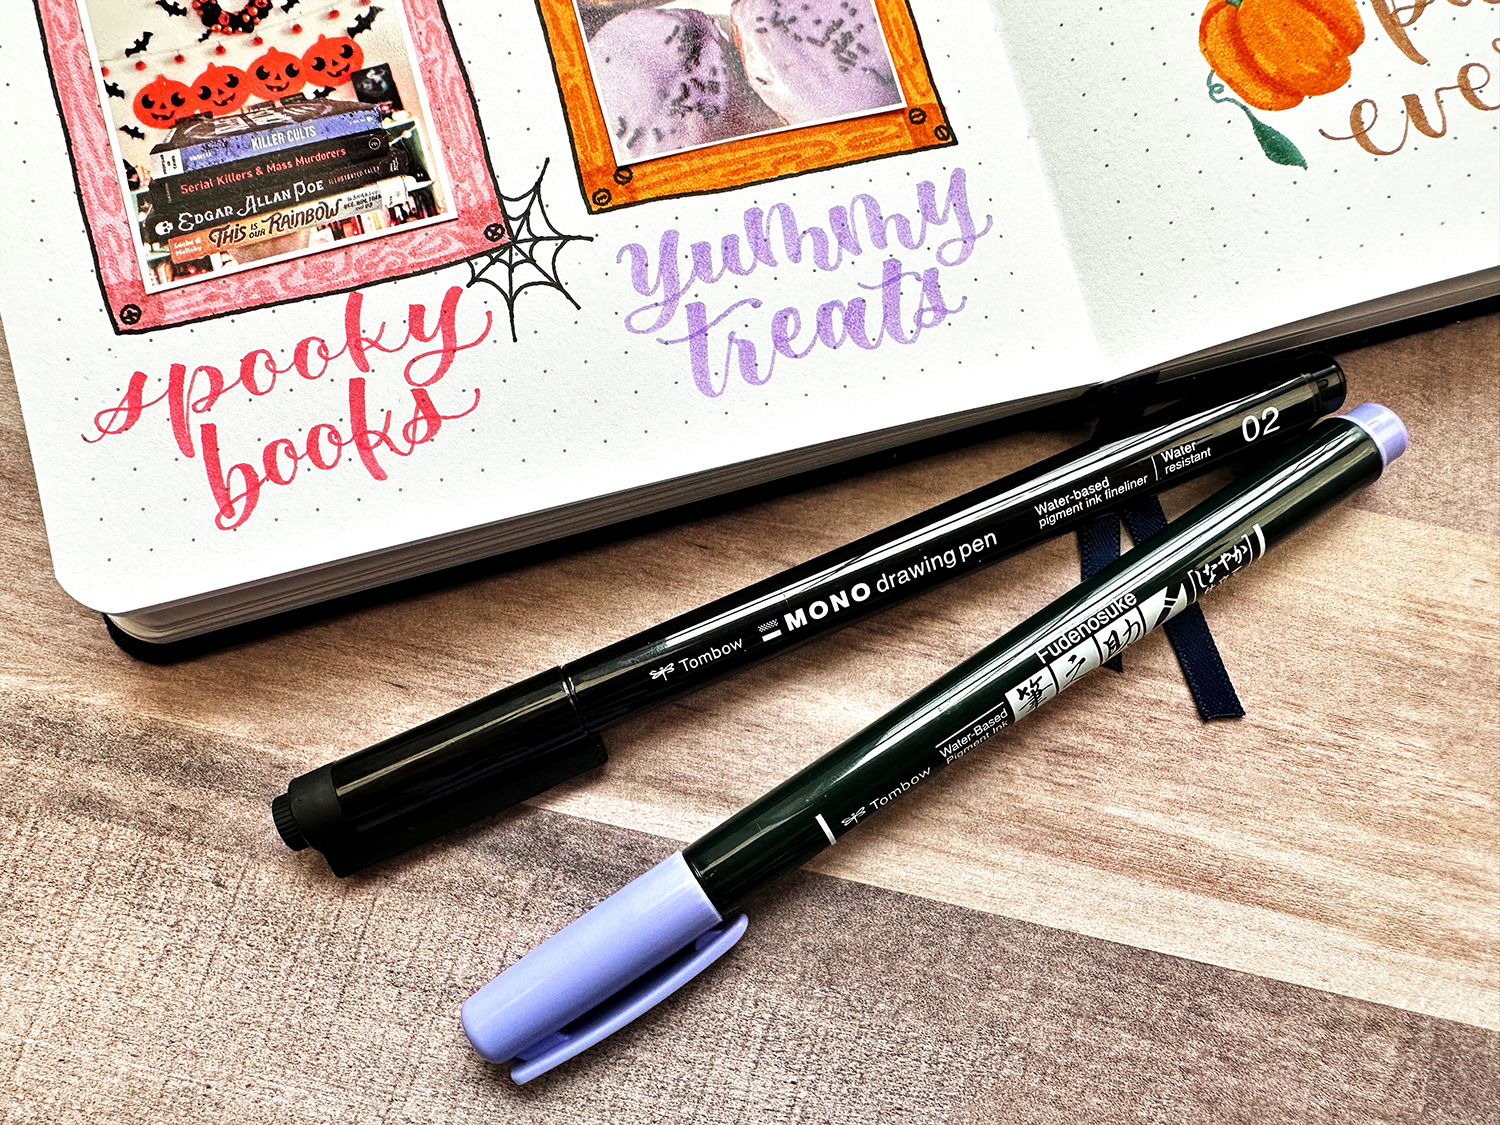 Use the Tombow MONO Drawing Pen to draw spiderwebs. #tombow